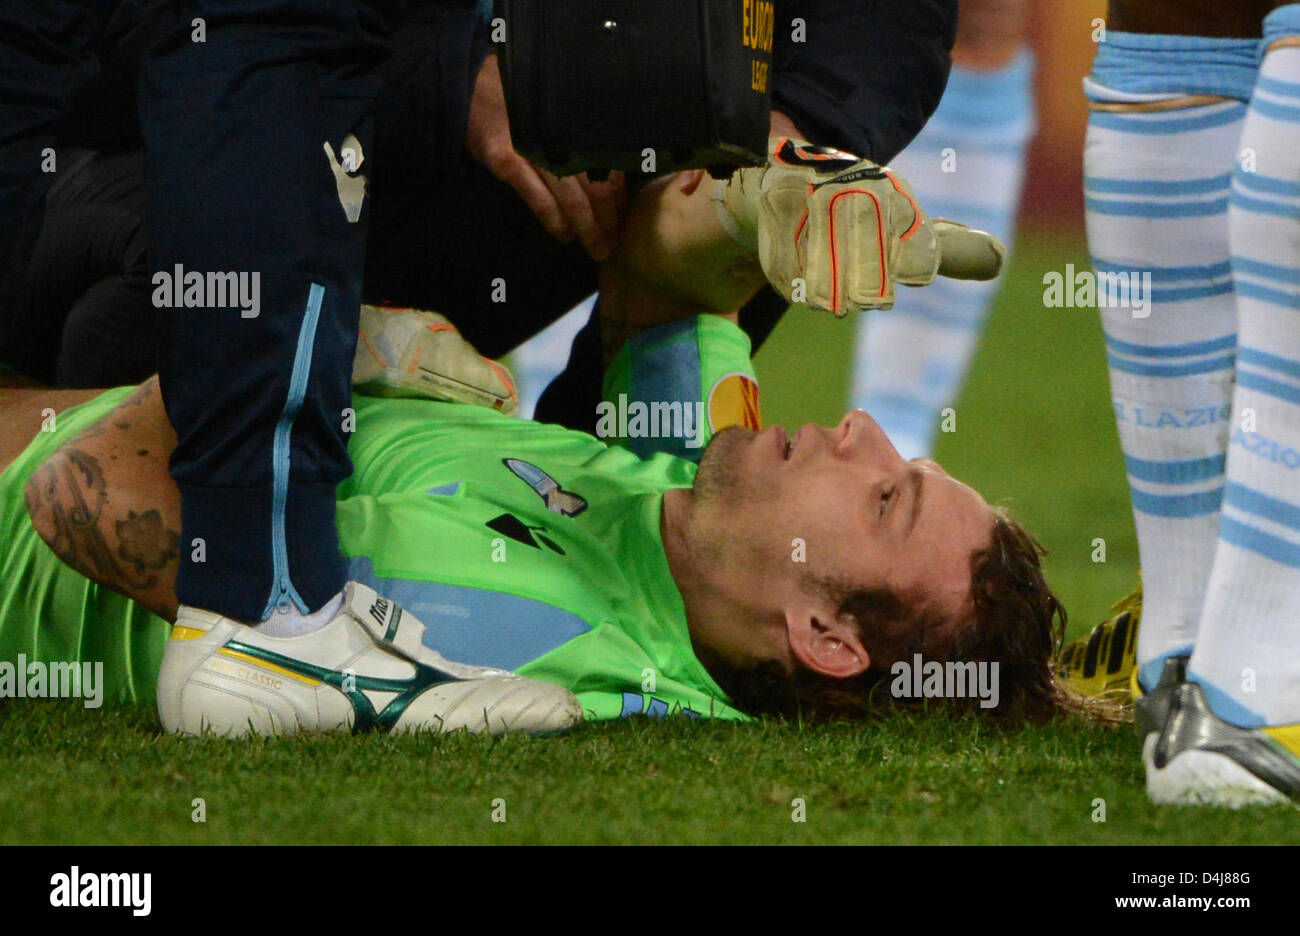 Lazio's goalkeeper Federico Marchetti lies on the pitch during the UEFA Europa League Round of 16 second leg soccer match between Lazio Rome and VfB Stuttgart at Stadio Olimpico in Rome, Italy, 14 March 2013. Foto: Marijan Murat/dpa +++(c) dpa - Bildfunk+++ Stock Photo